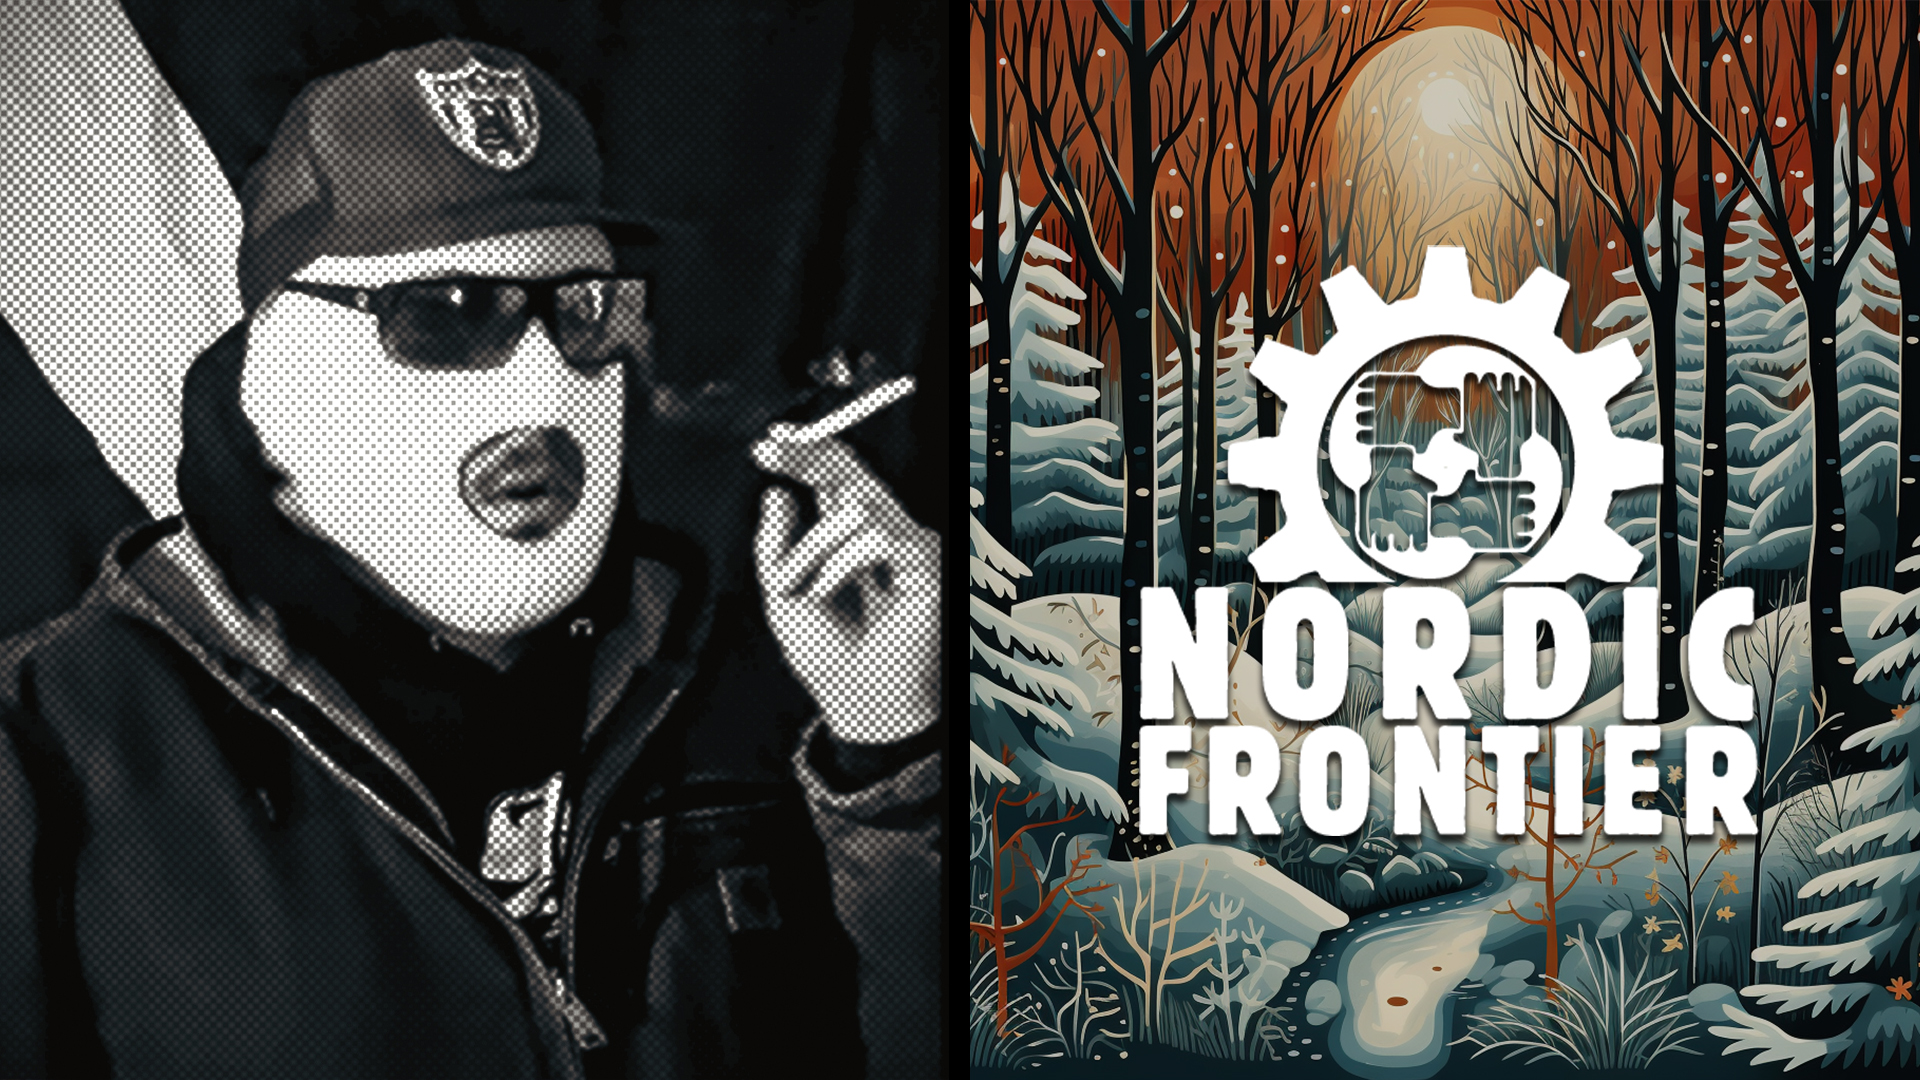 NORDIC FRONTIER #279: The Ferryman’s Toll